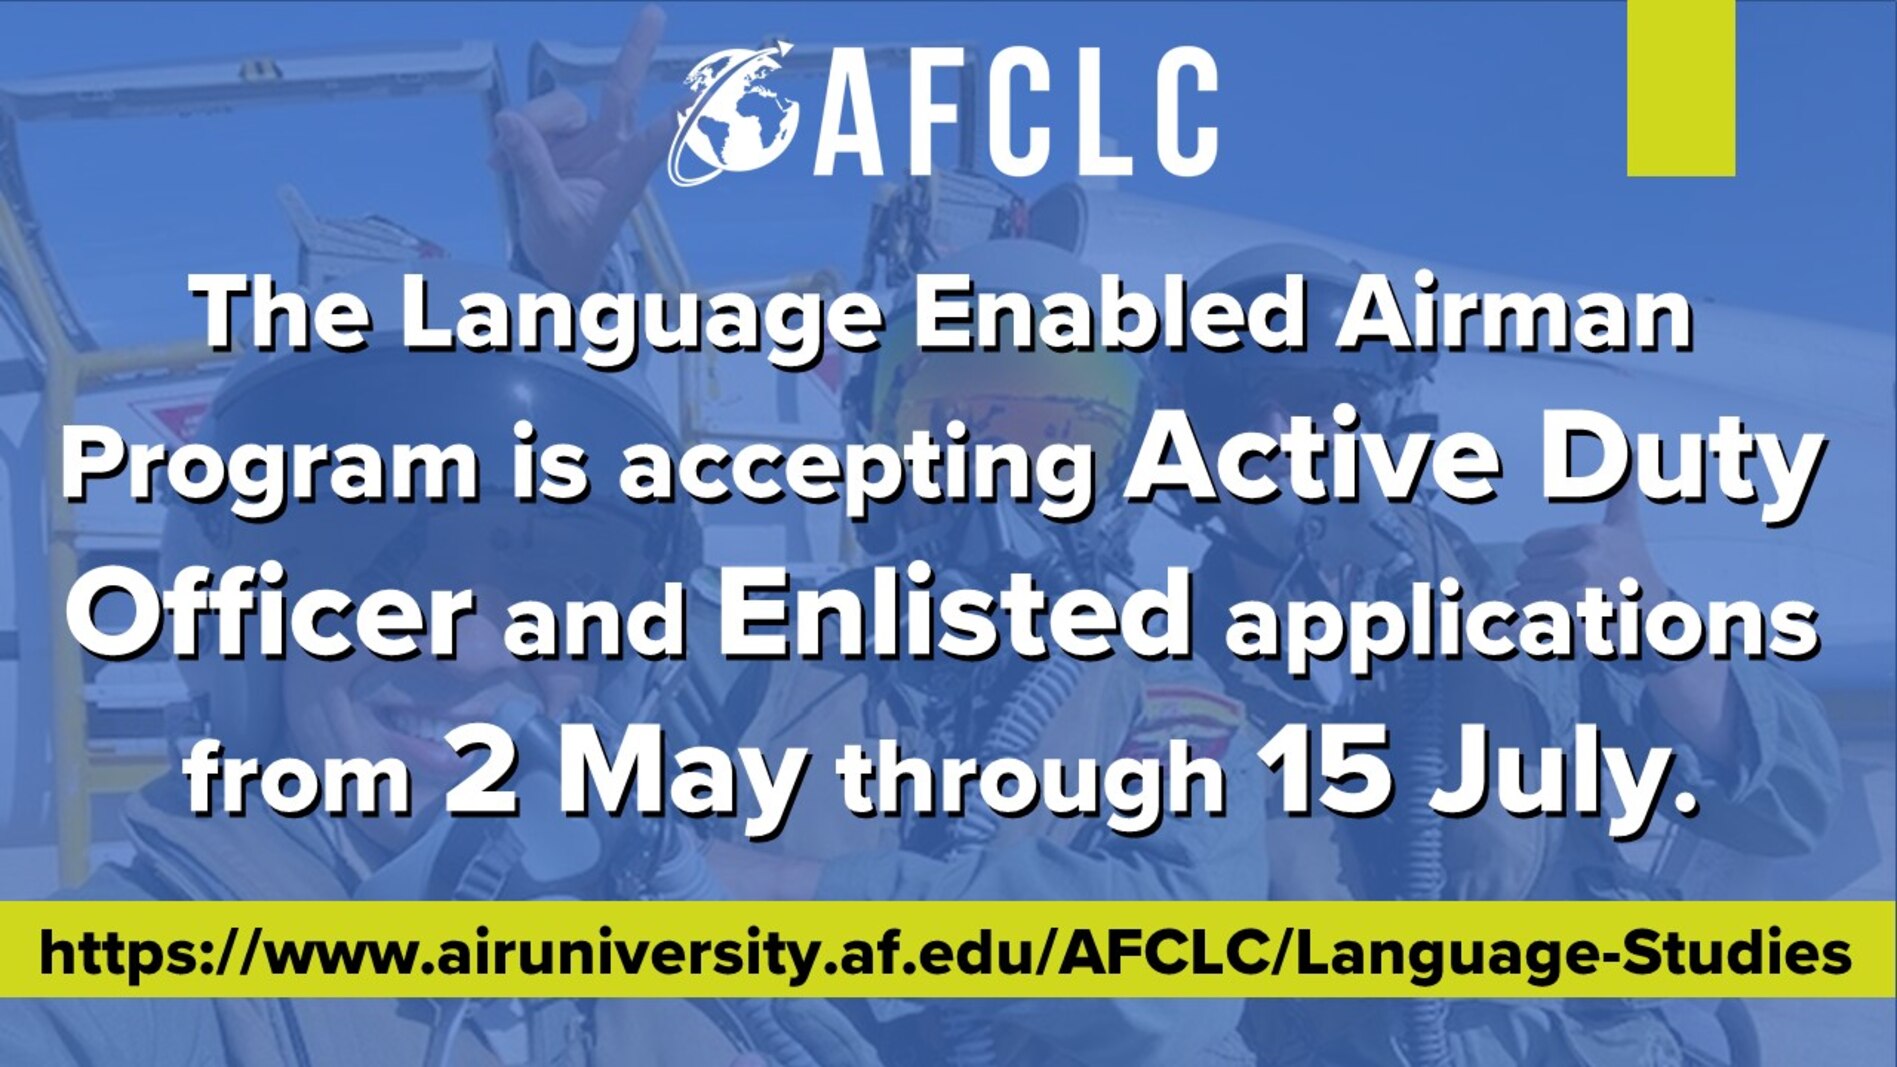 The Active Duty Officer and Enlisted application window for the Language Enabled Airman Program opens 2 May - 15 July, 2022.